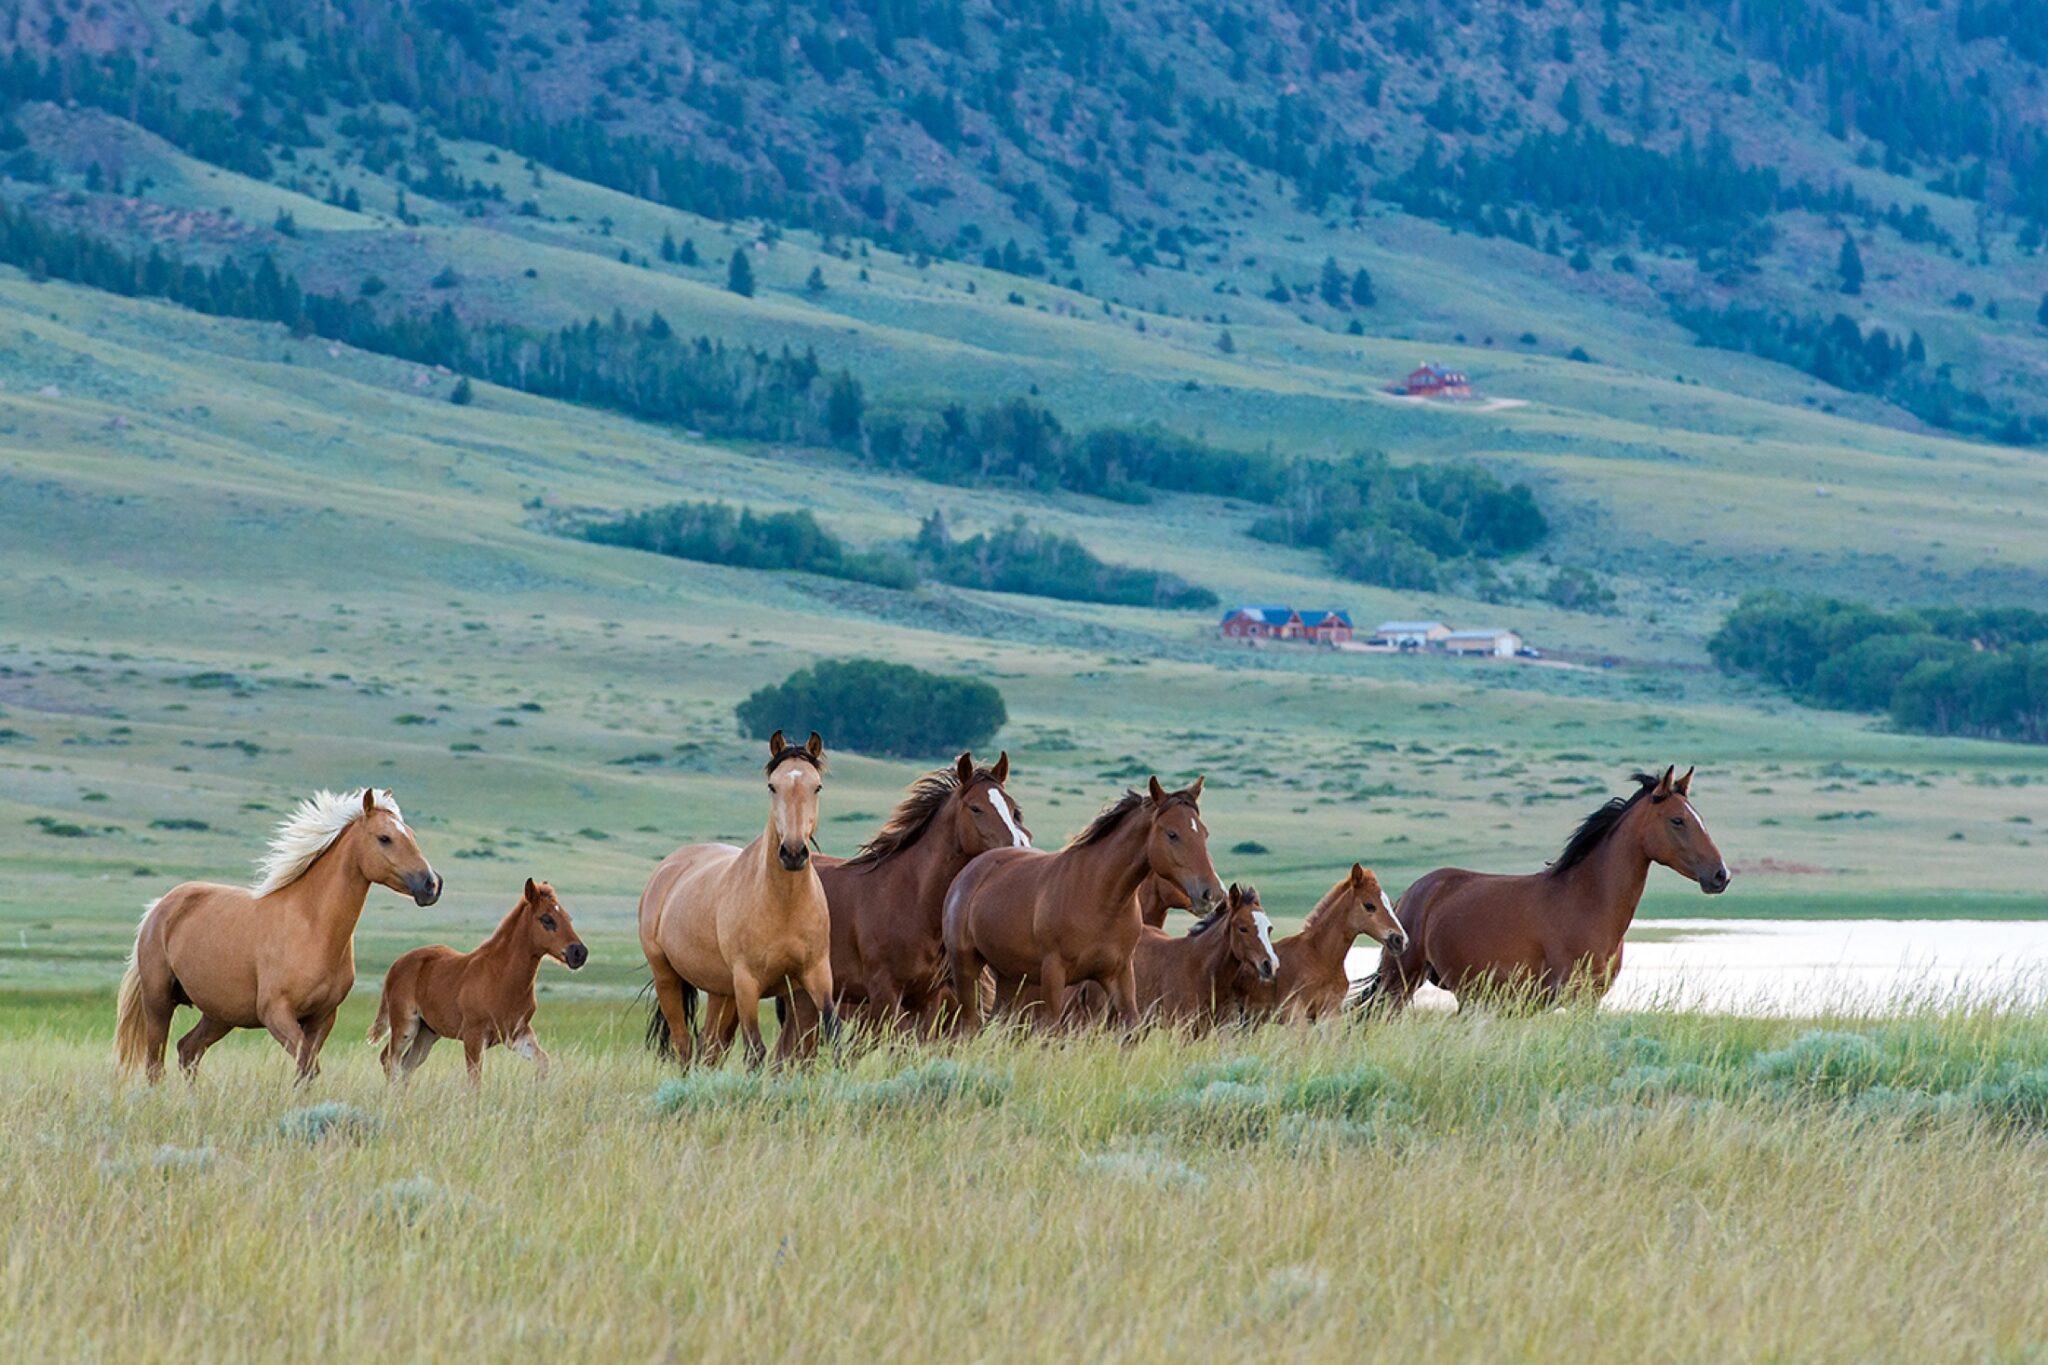 A group of wild horses running near mountains